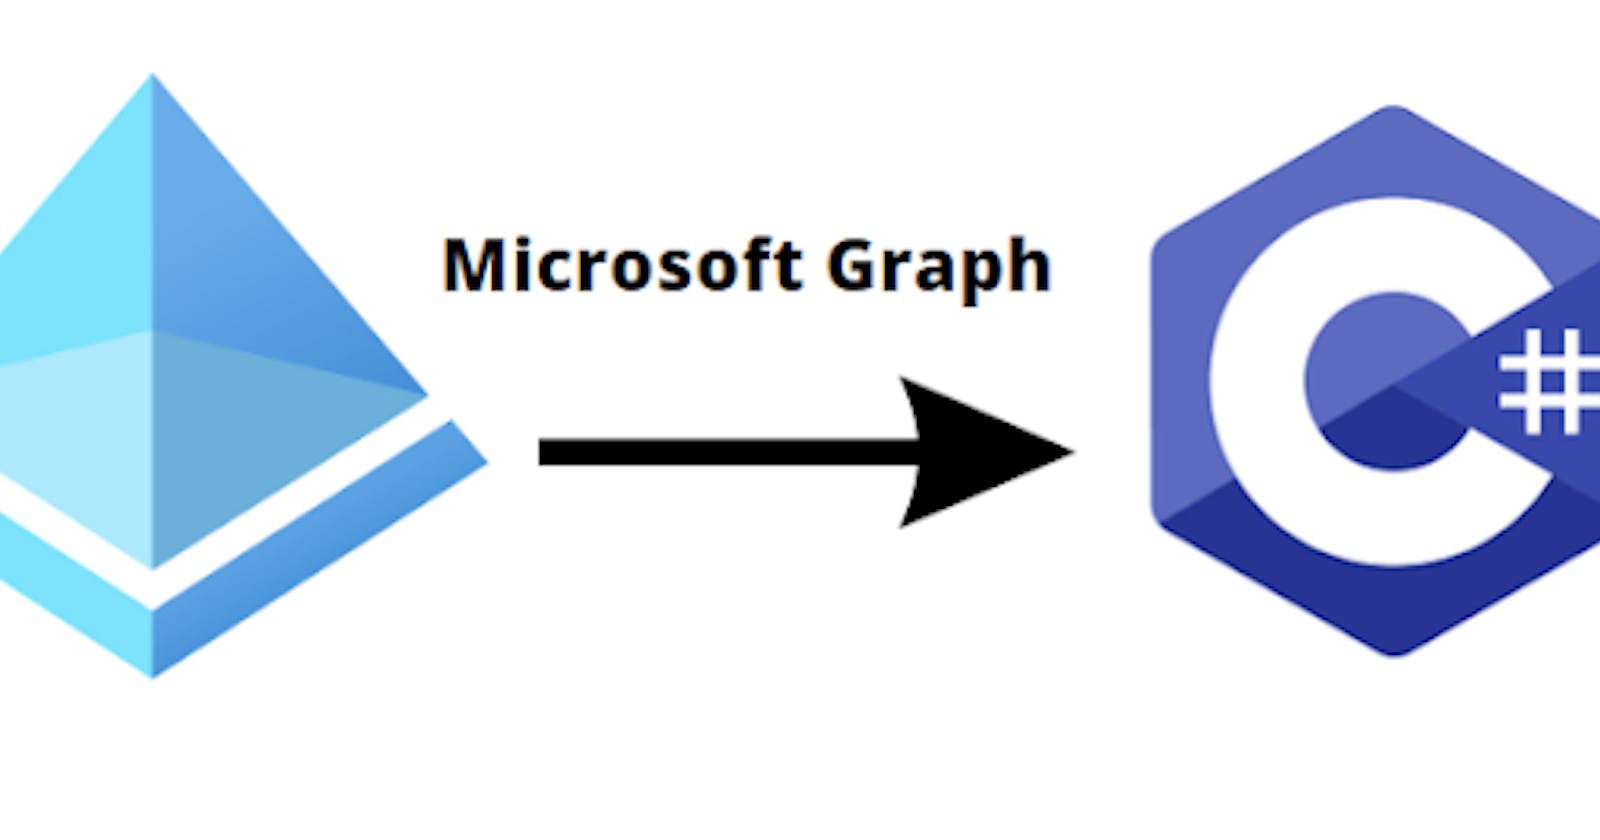 Read Members from AAD Groups Using C#